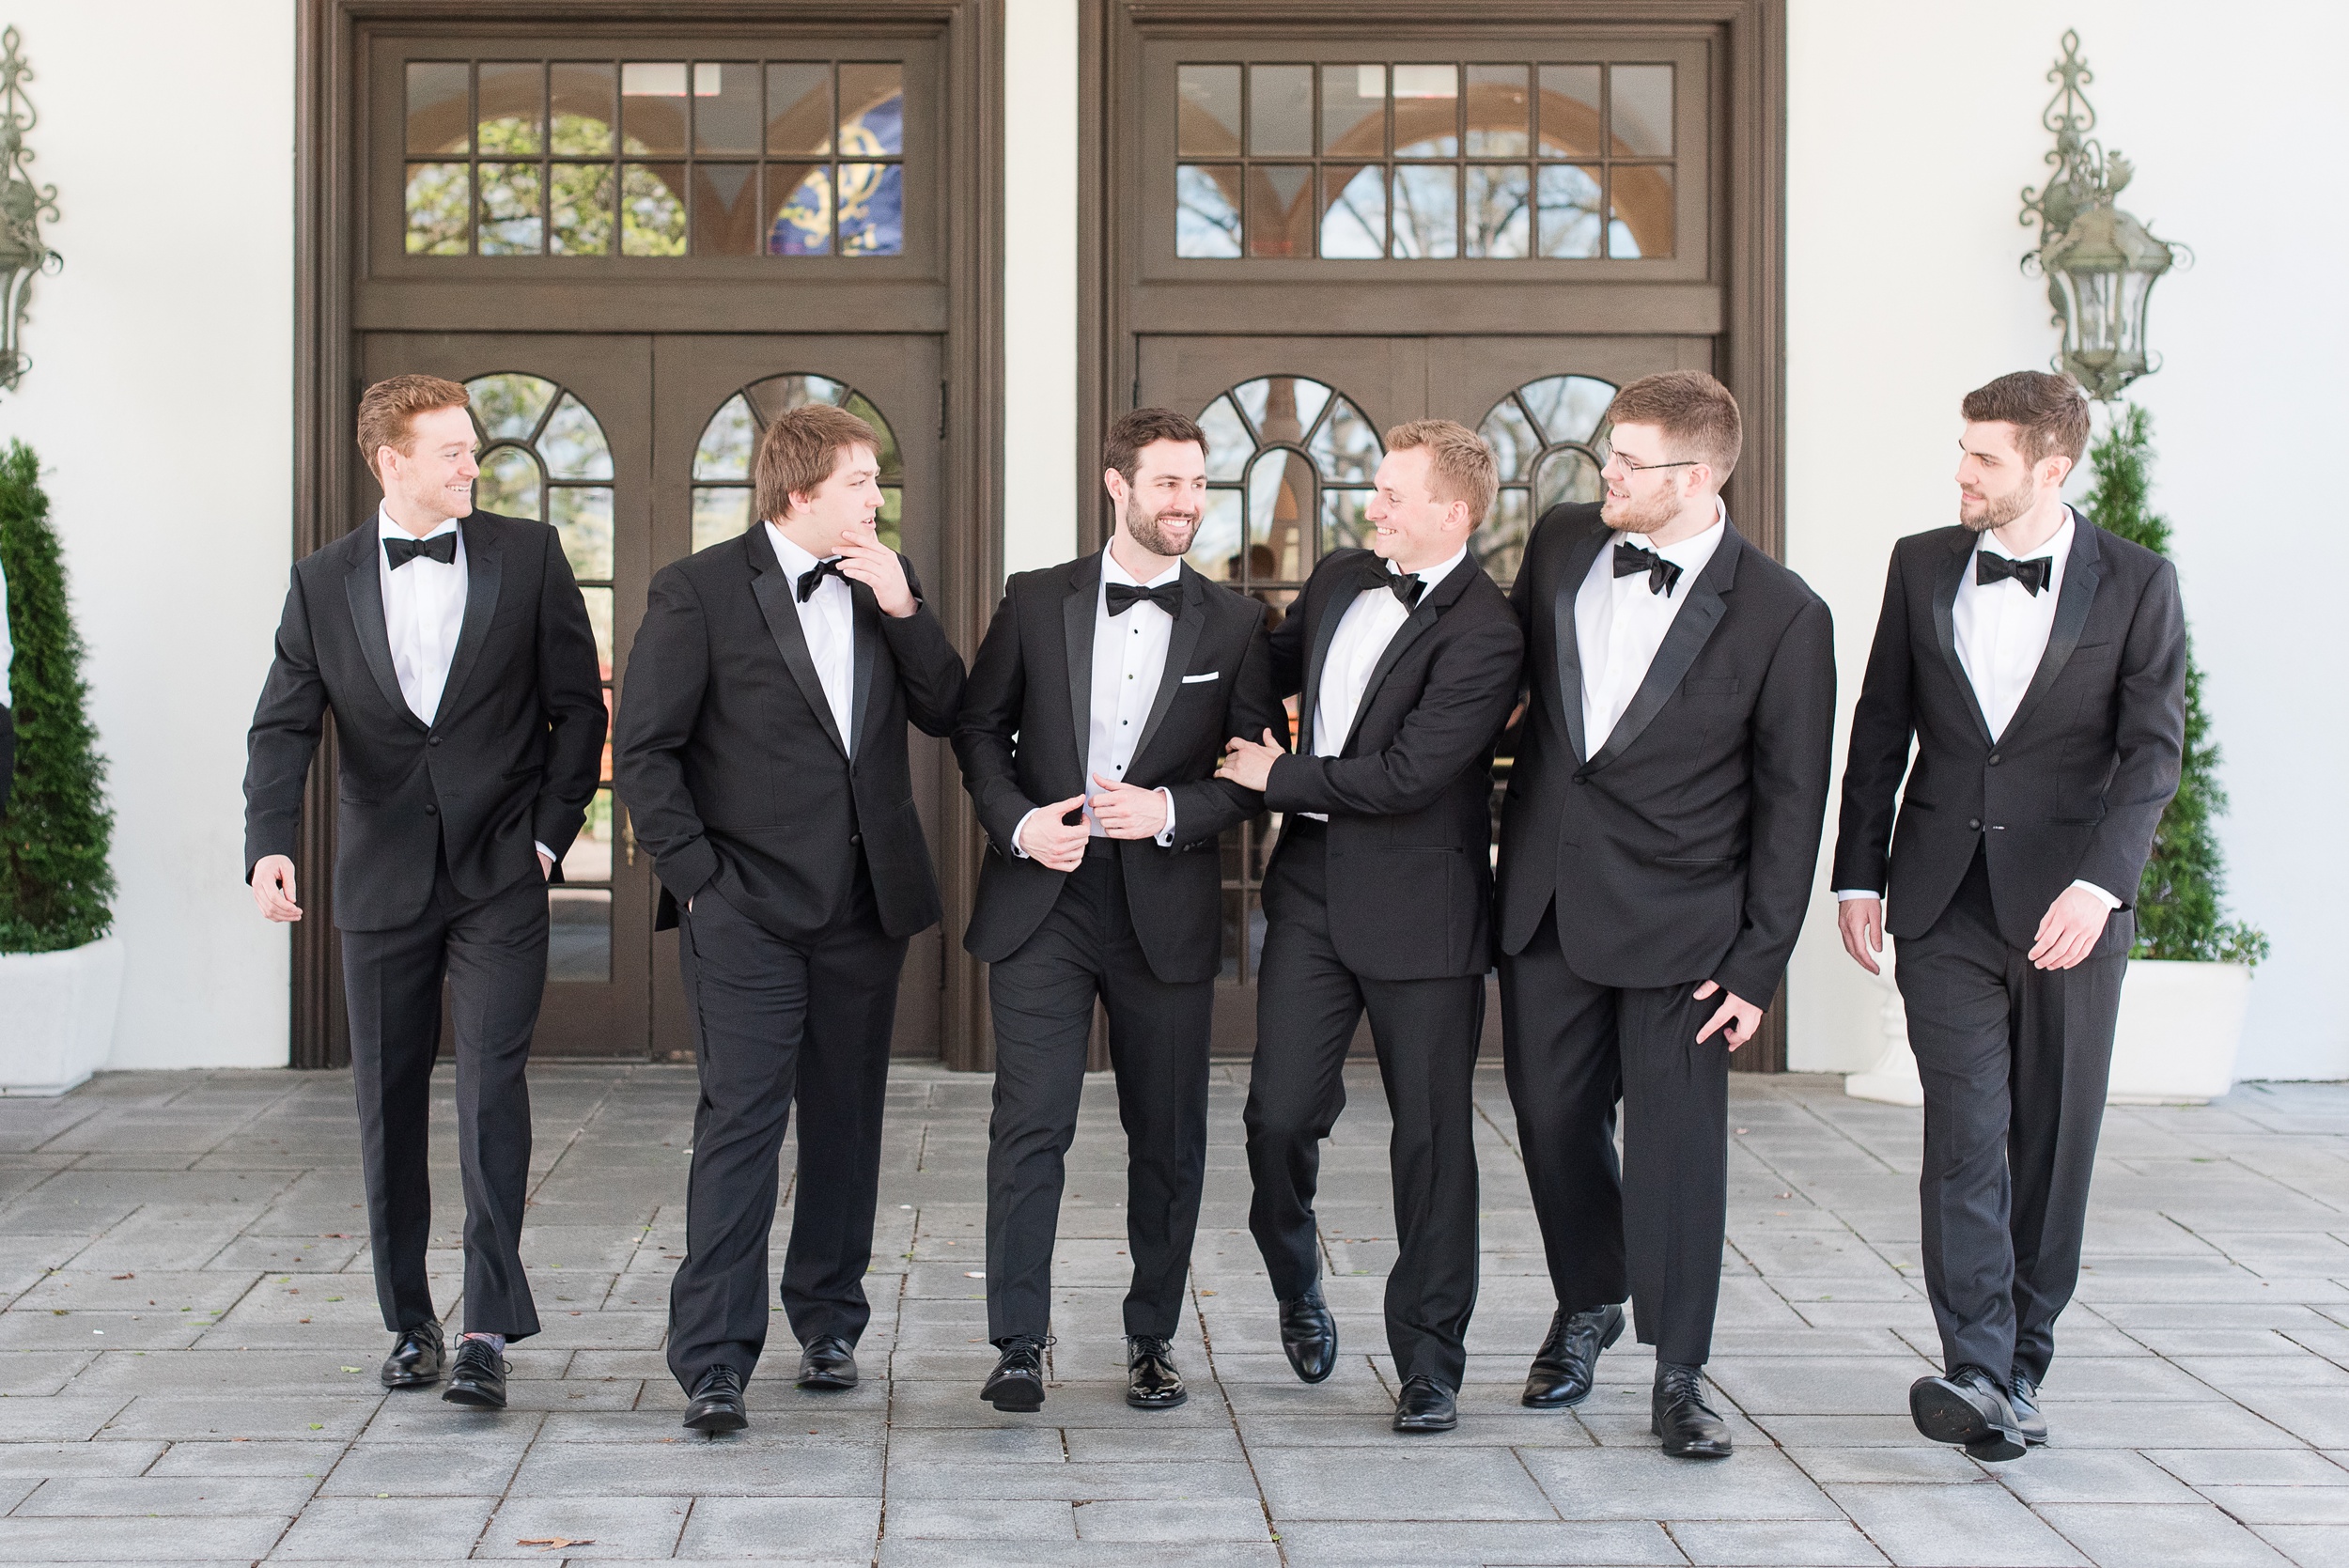 A groom walks on a patio while laughing with his groomsmen in matching black tuxedos